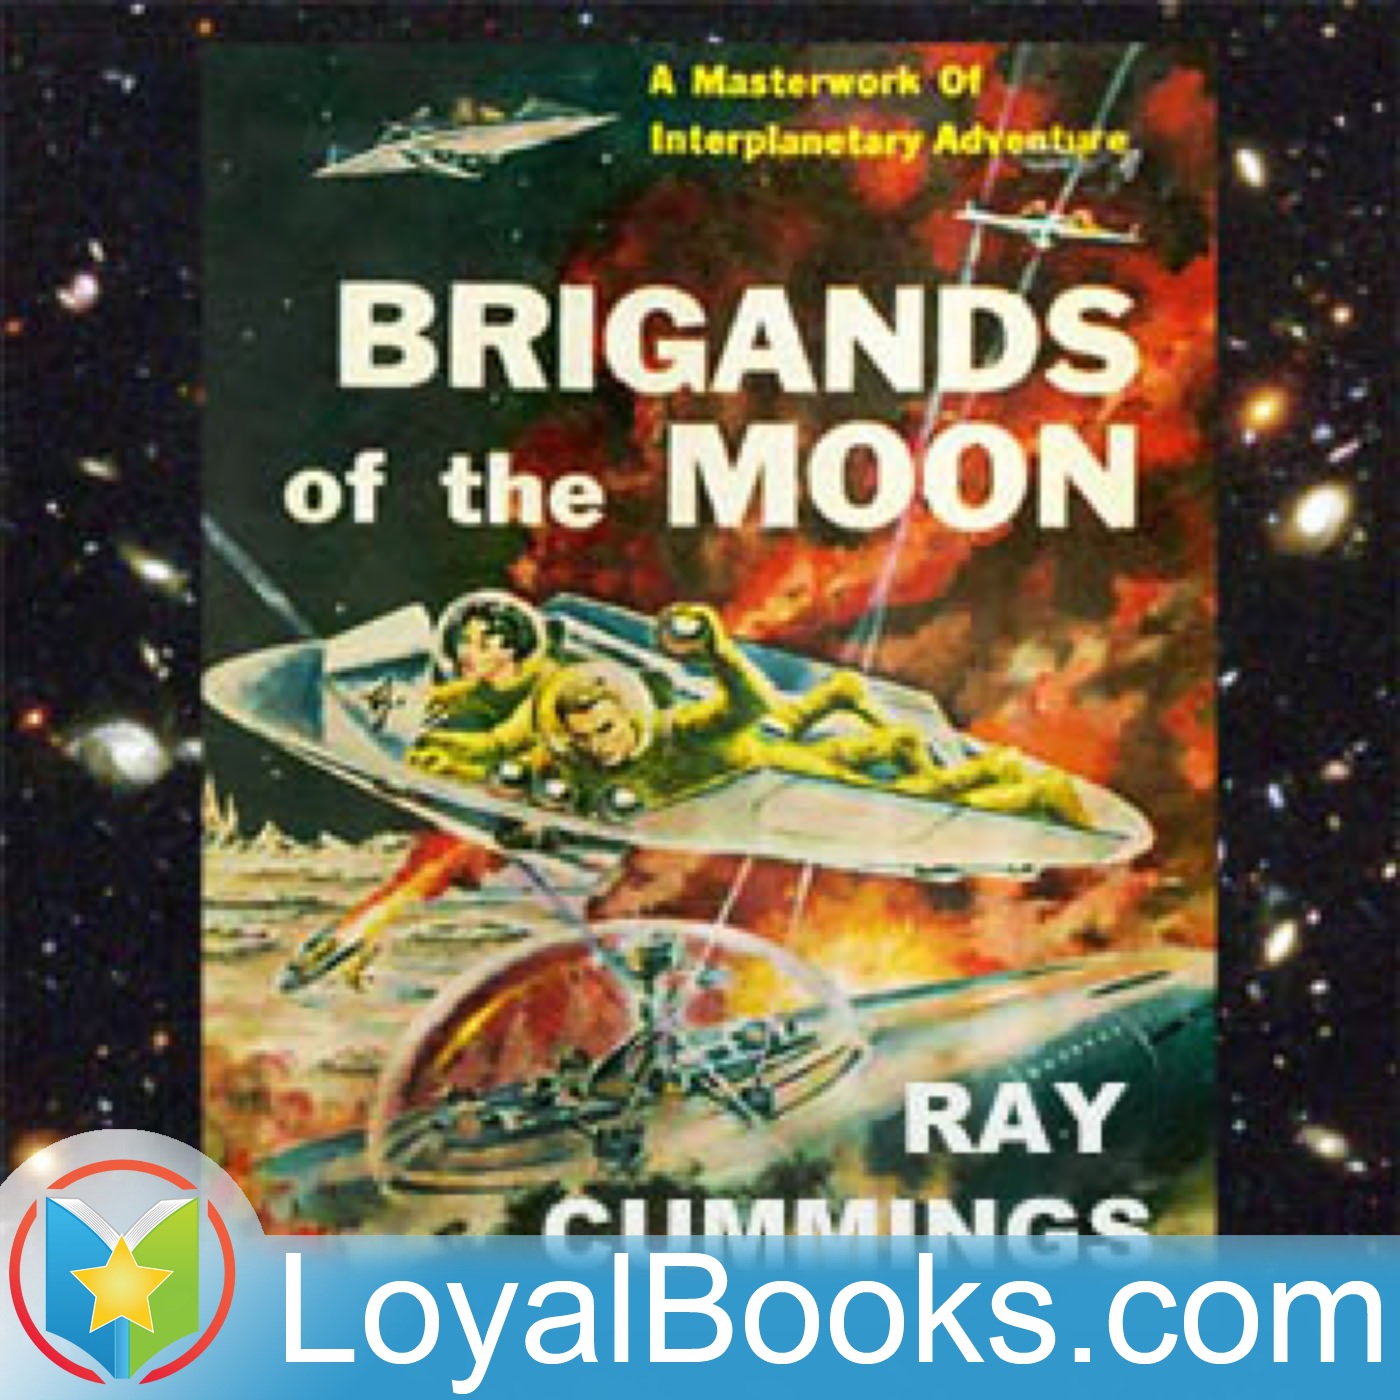 Brigands of the Moon by Ray Cummings